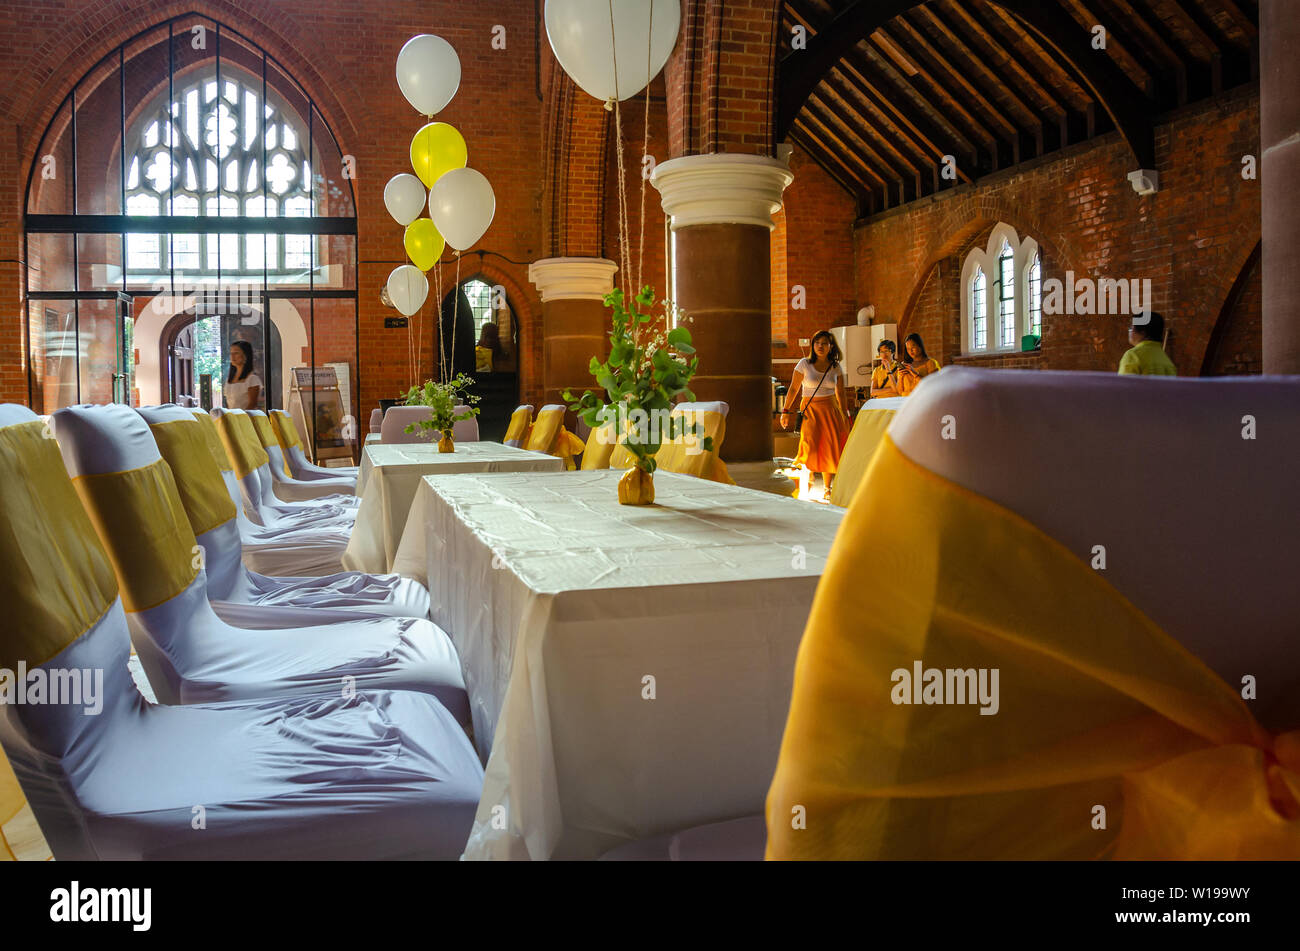 Tables and chairs set out in a church hall, decorated with helium filled balloons and yellow ribbons ready for a party, reception or celebration Stock Photo